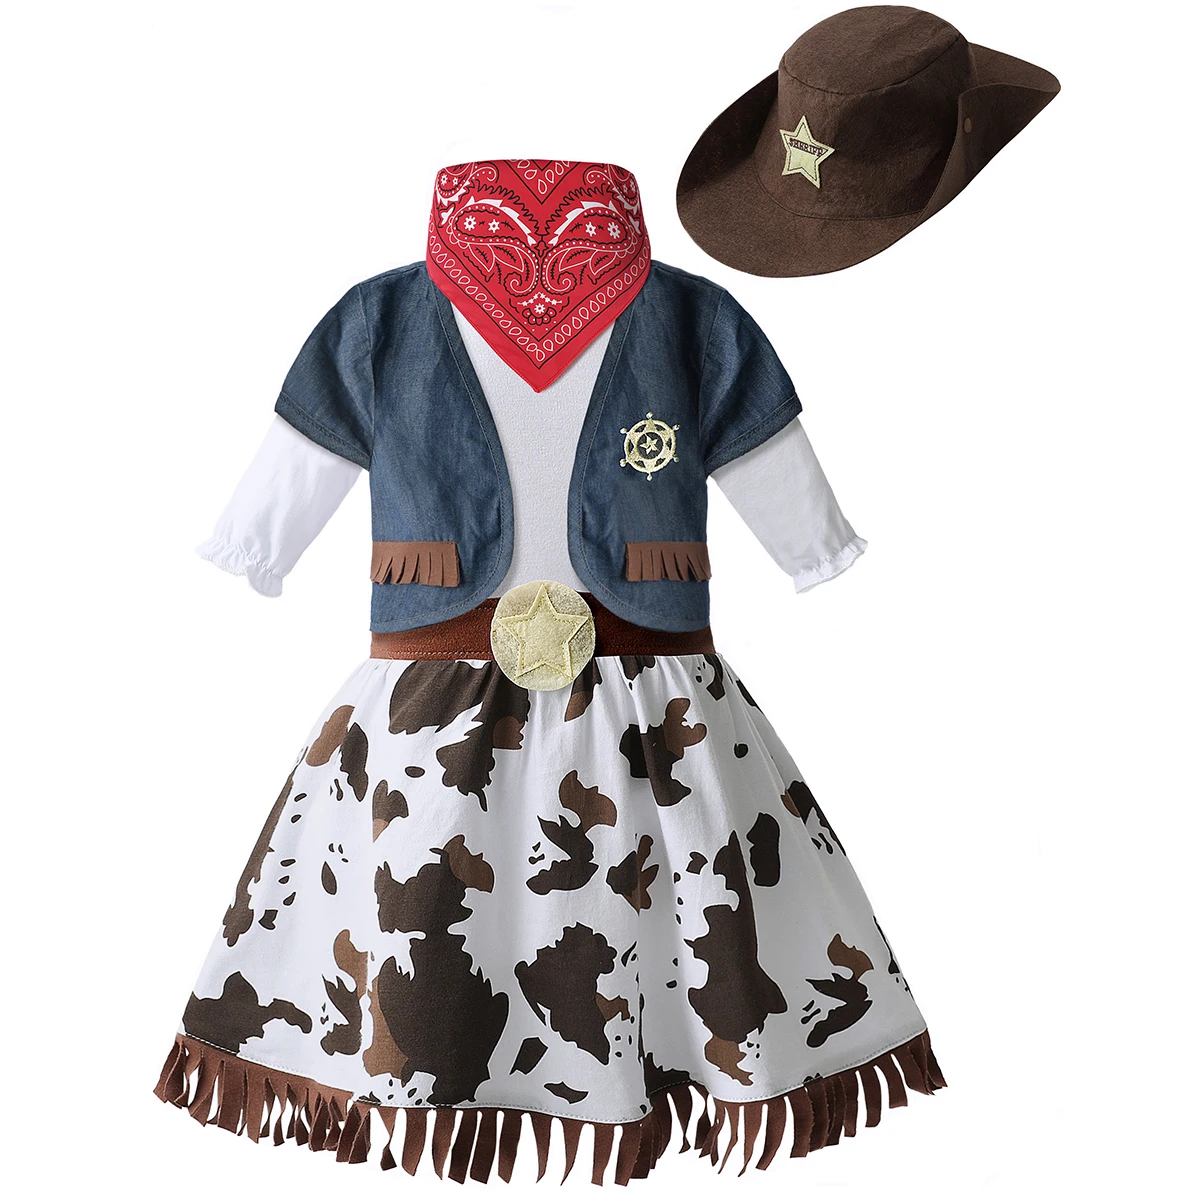 

Cowgirl Halloween Costume for Girls Toddler Western Fancy Dress Outfit Newborn Baby Carnival Skirt Infant Party Clothes 5PCS